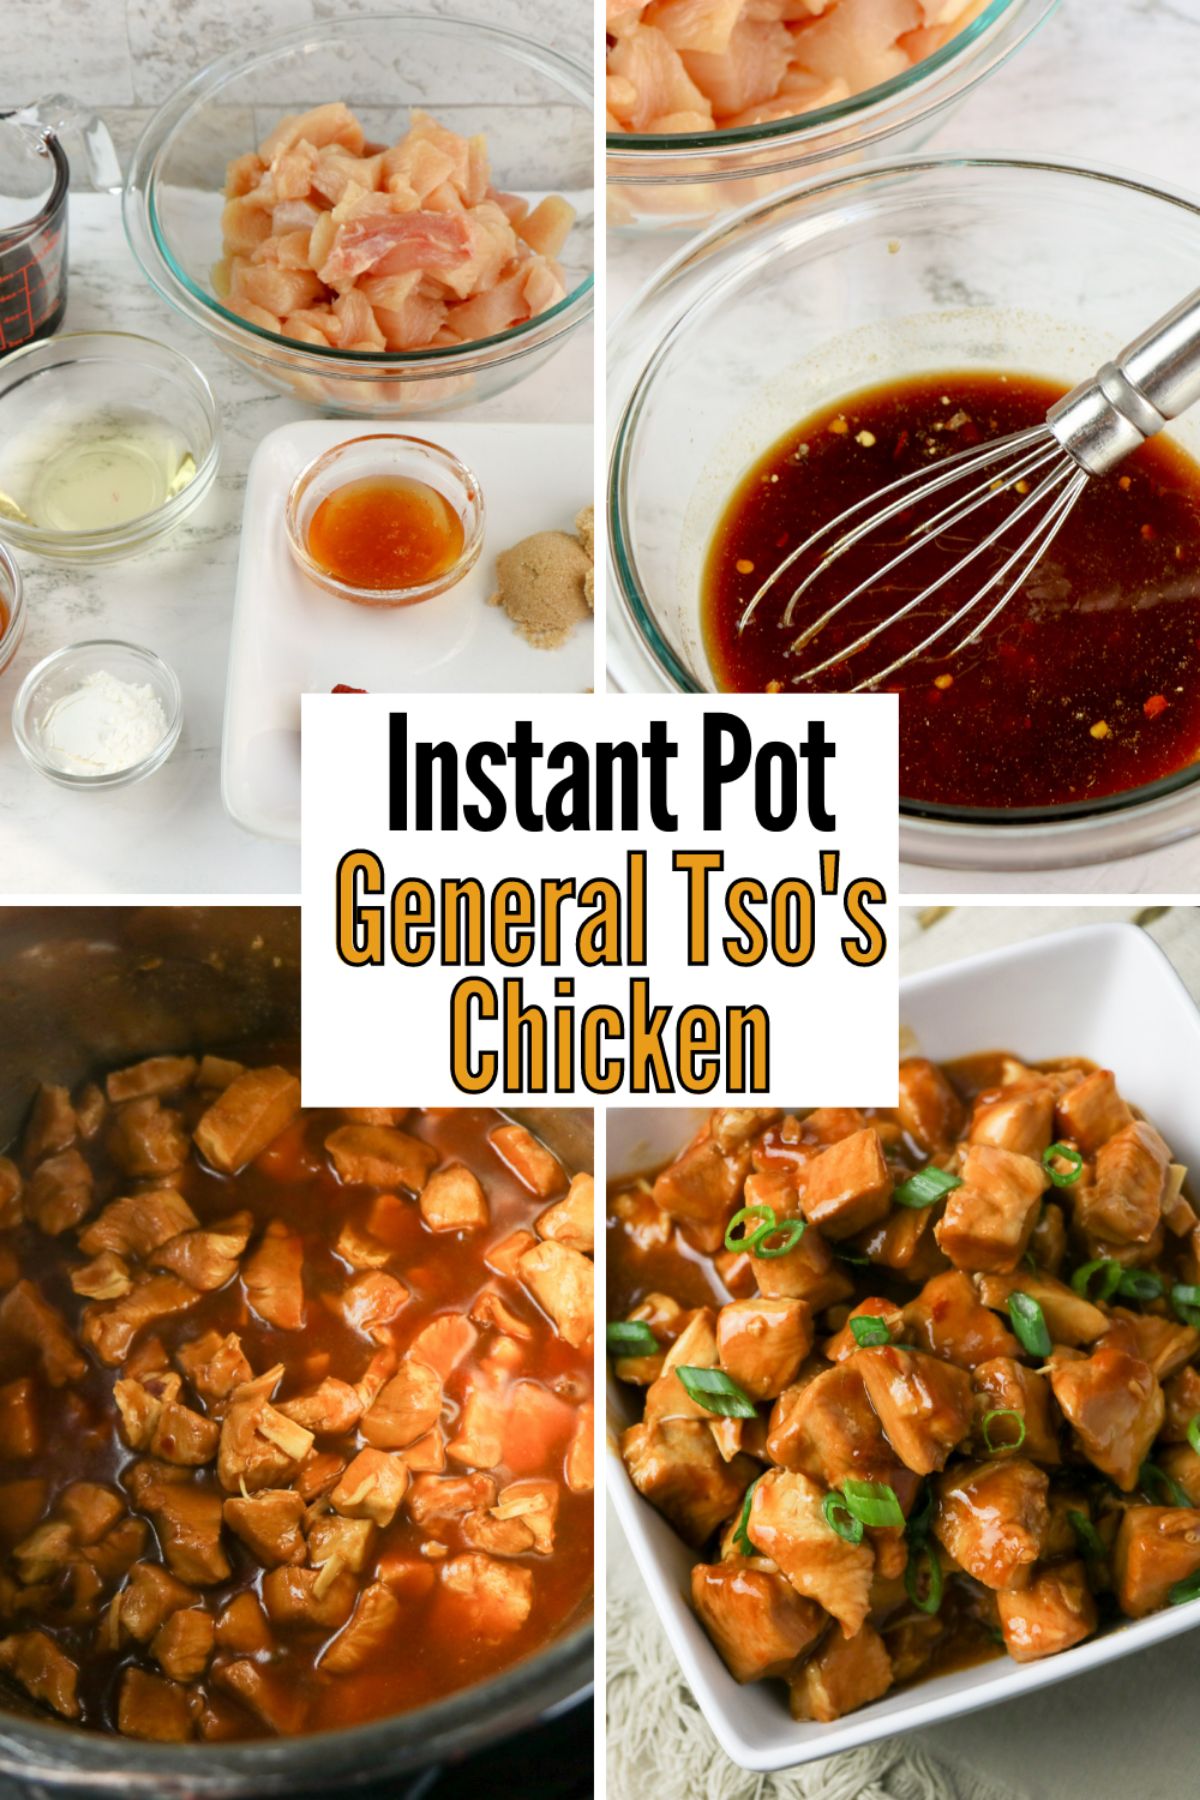 Instant Pot General Tso’s Chicken is perfect to whip up when you are craving Chinese takeout! It’s so easy and ready in less than 30 minutes. #instantpot #pressurecooker #generaltsoschicken #chinesefood #chicken via @wondermomwannab